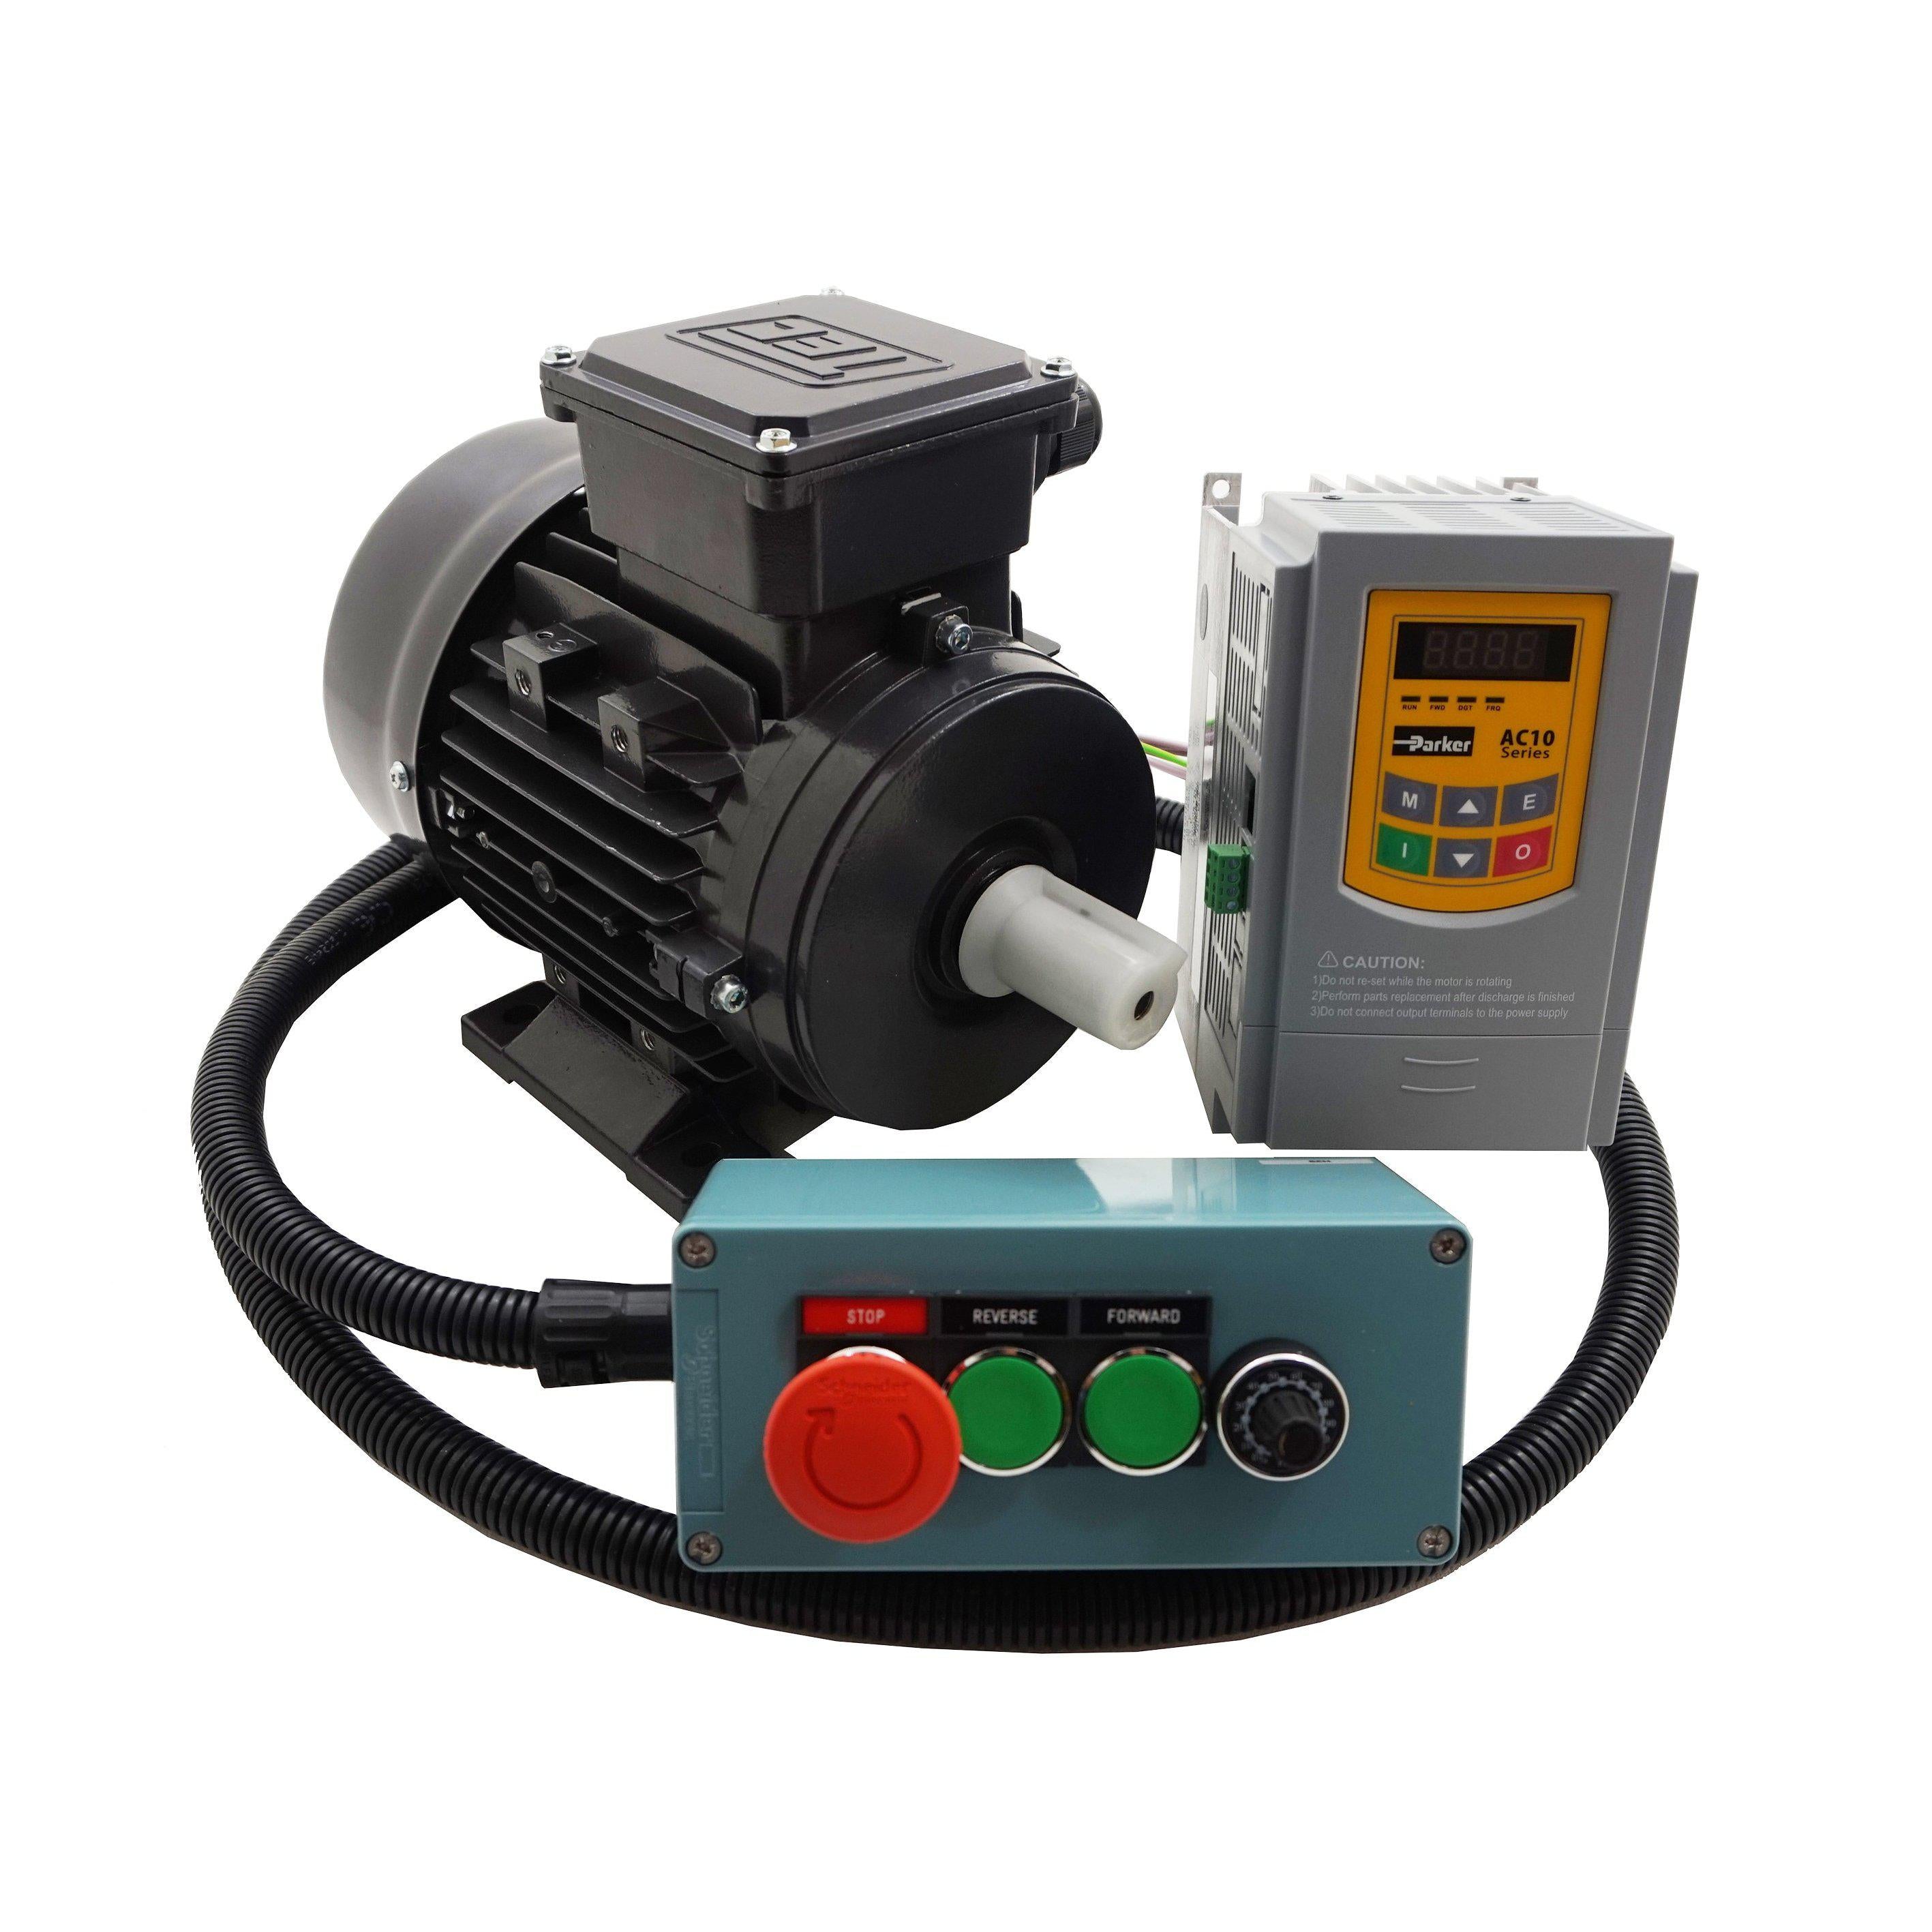 Soft Start Module Soft Start For Machinery Electric Tools 230v To